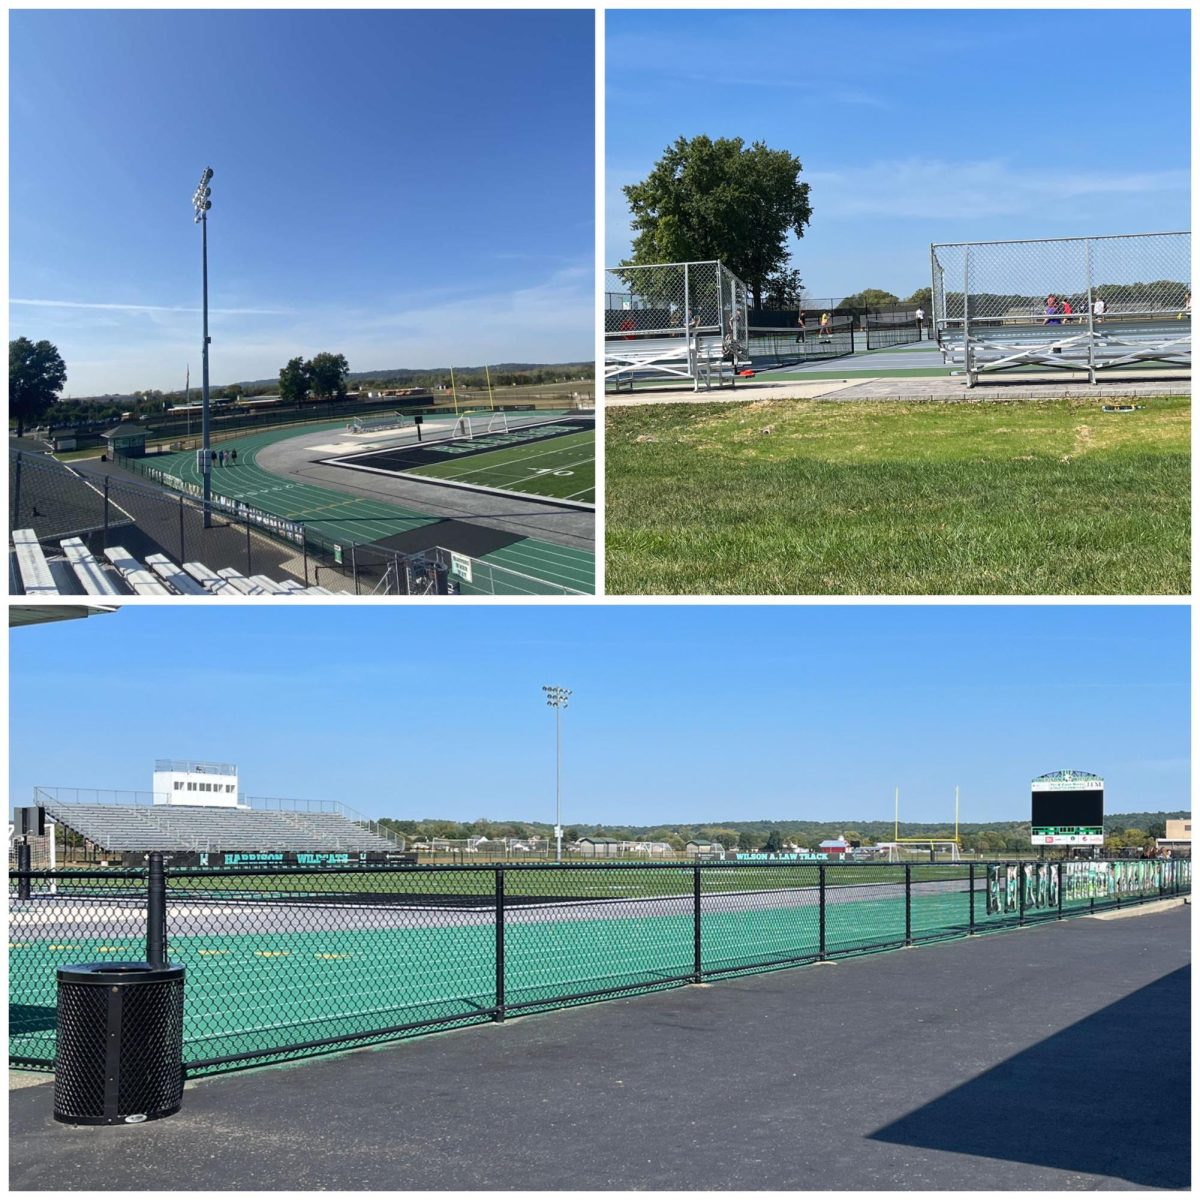 Examples of some of the new upgrades including the tennis court, track, and tennis stands. 